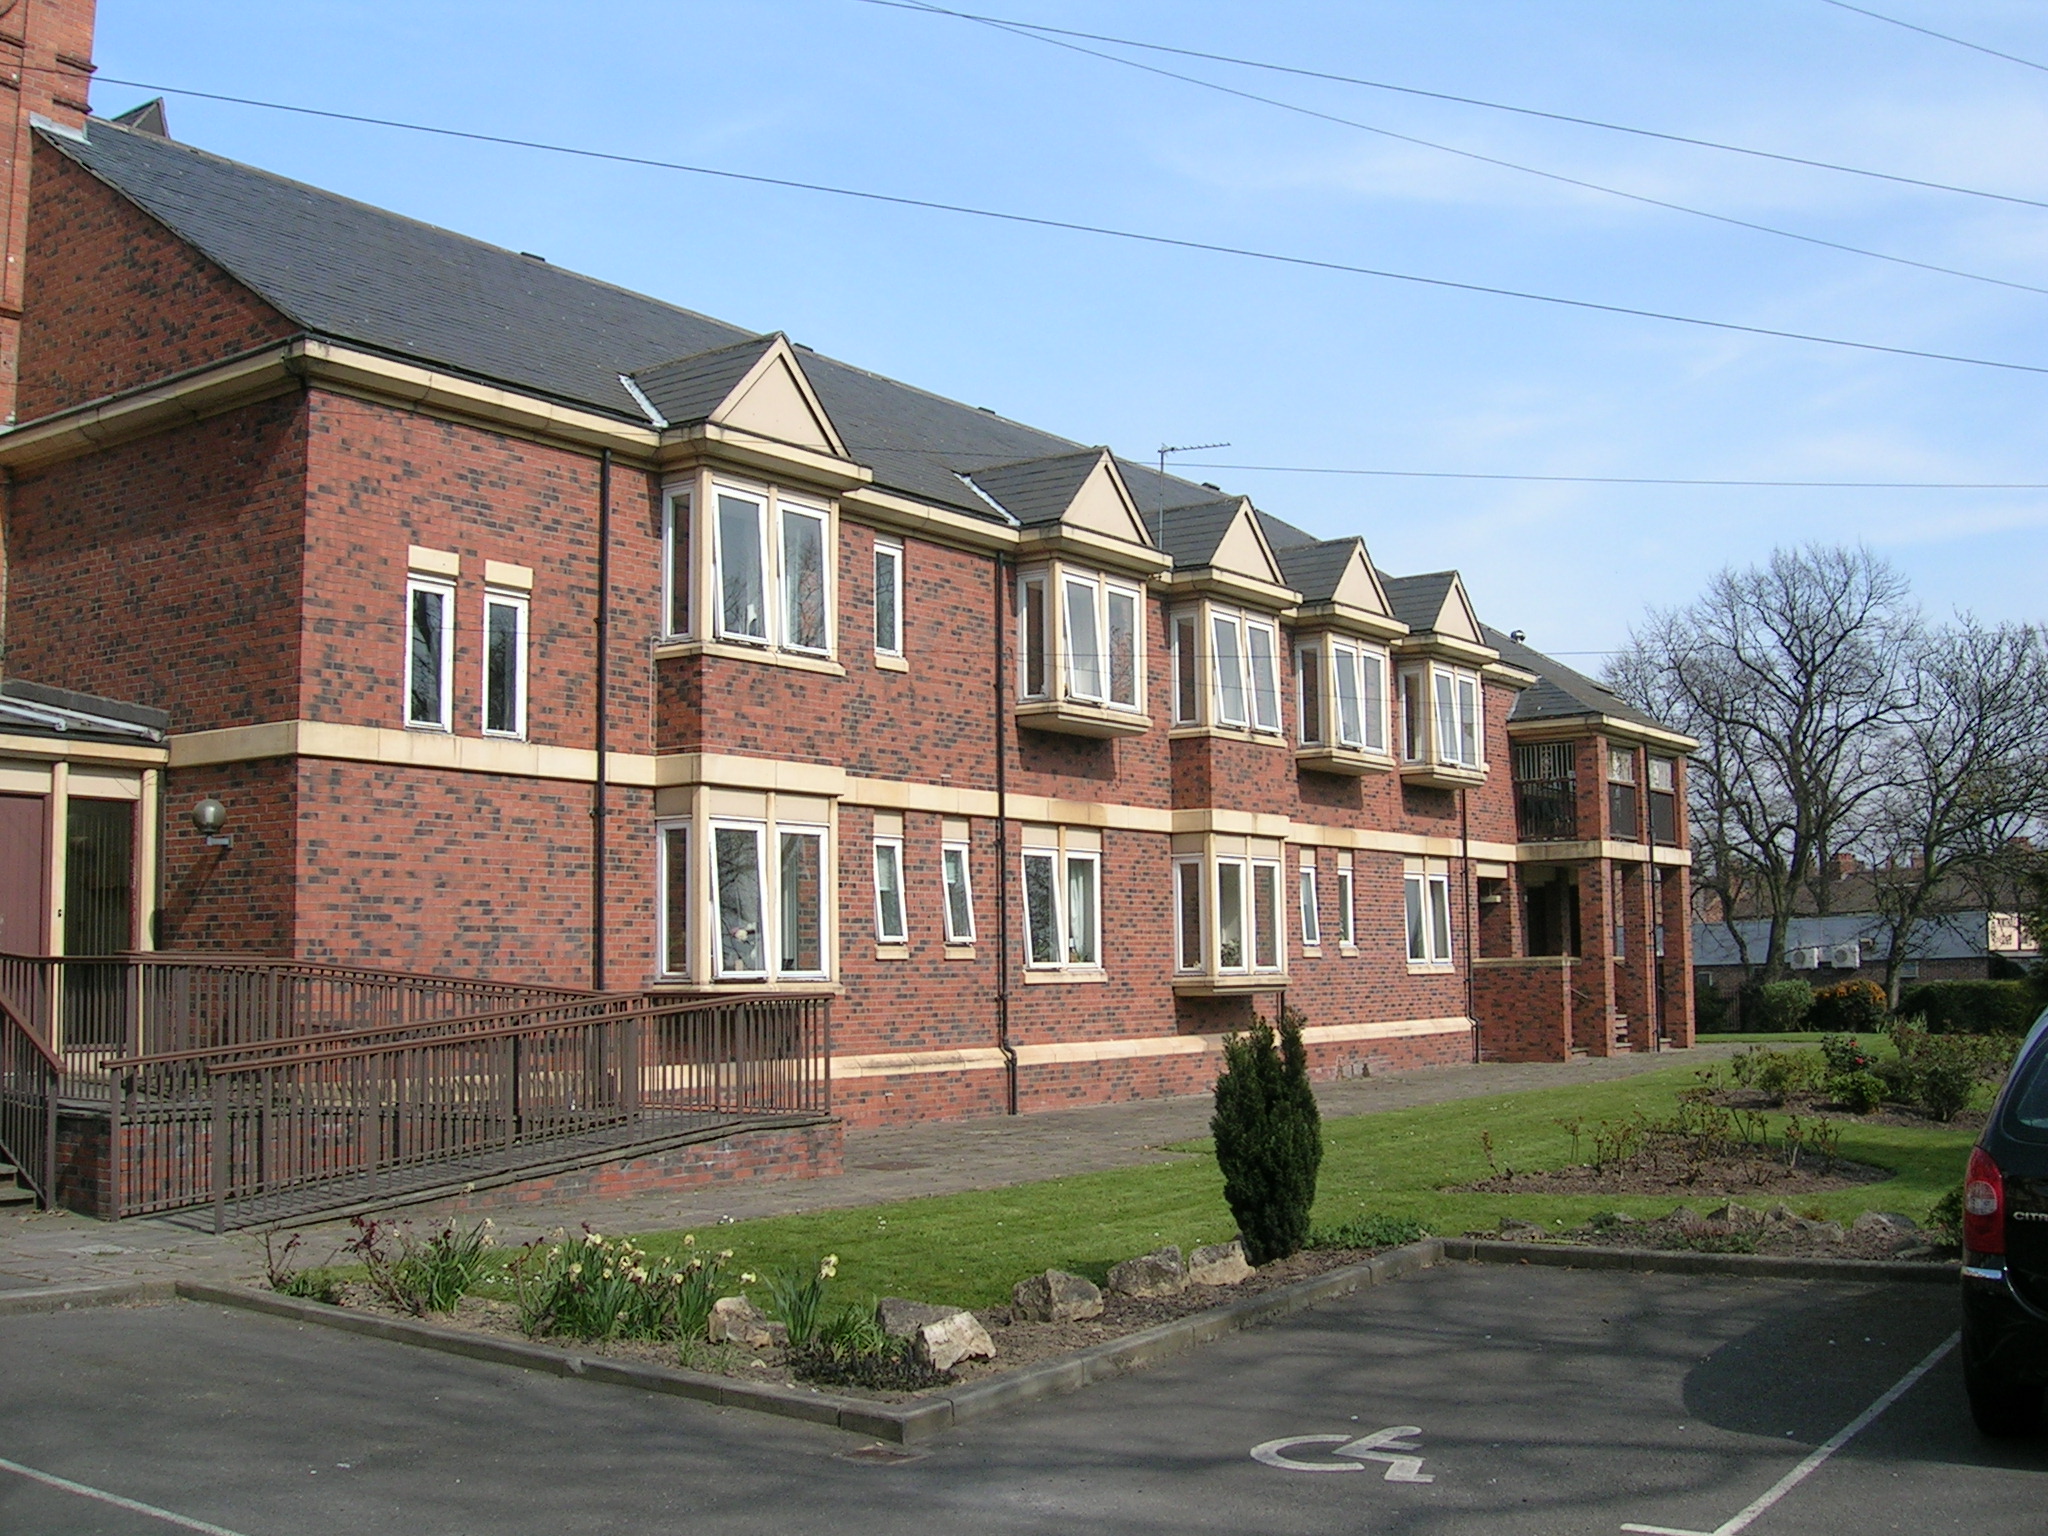 Victoria House Care Centre 2: Key Healthcare is dedicated to caring for elderly residents in safe. We have multiple dementia care homes including our care home middlesbrough, our care home St. Helen and care home saltburn. We excel in monitoring and improving care levels.